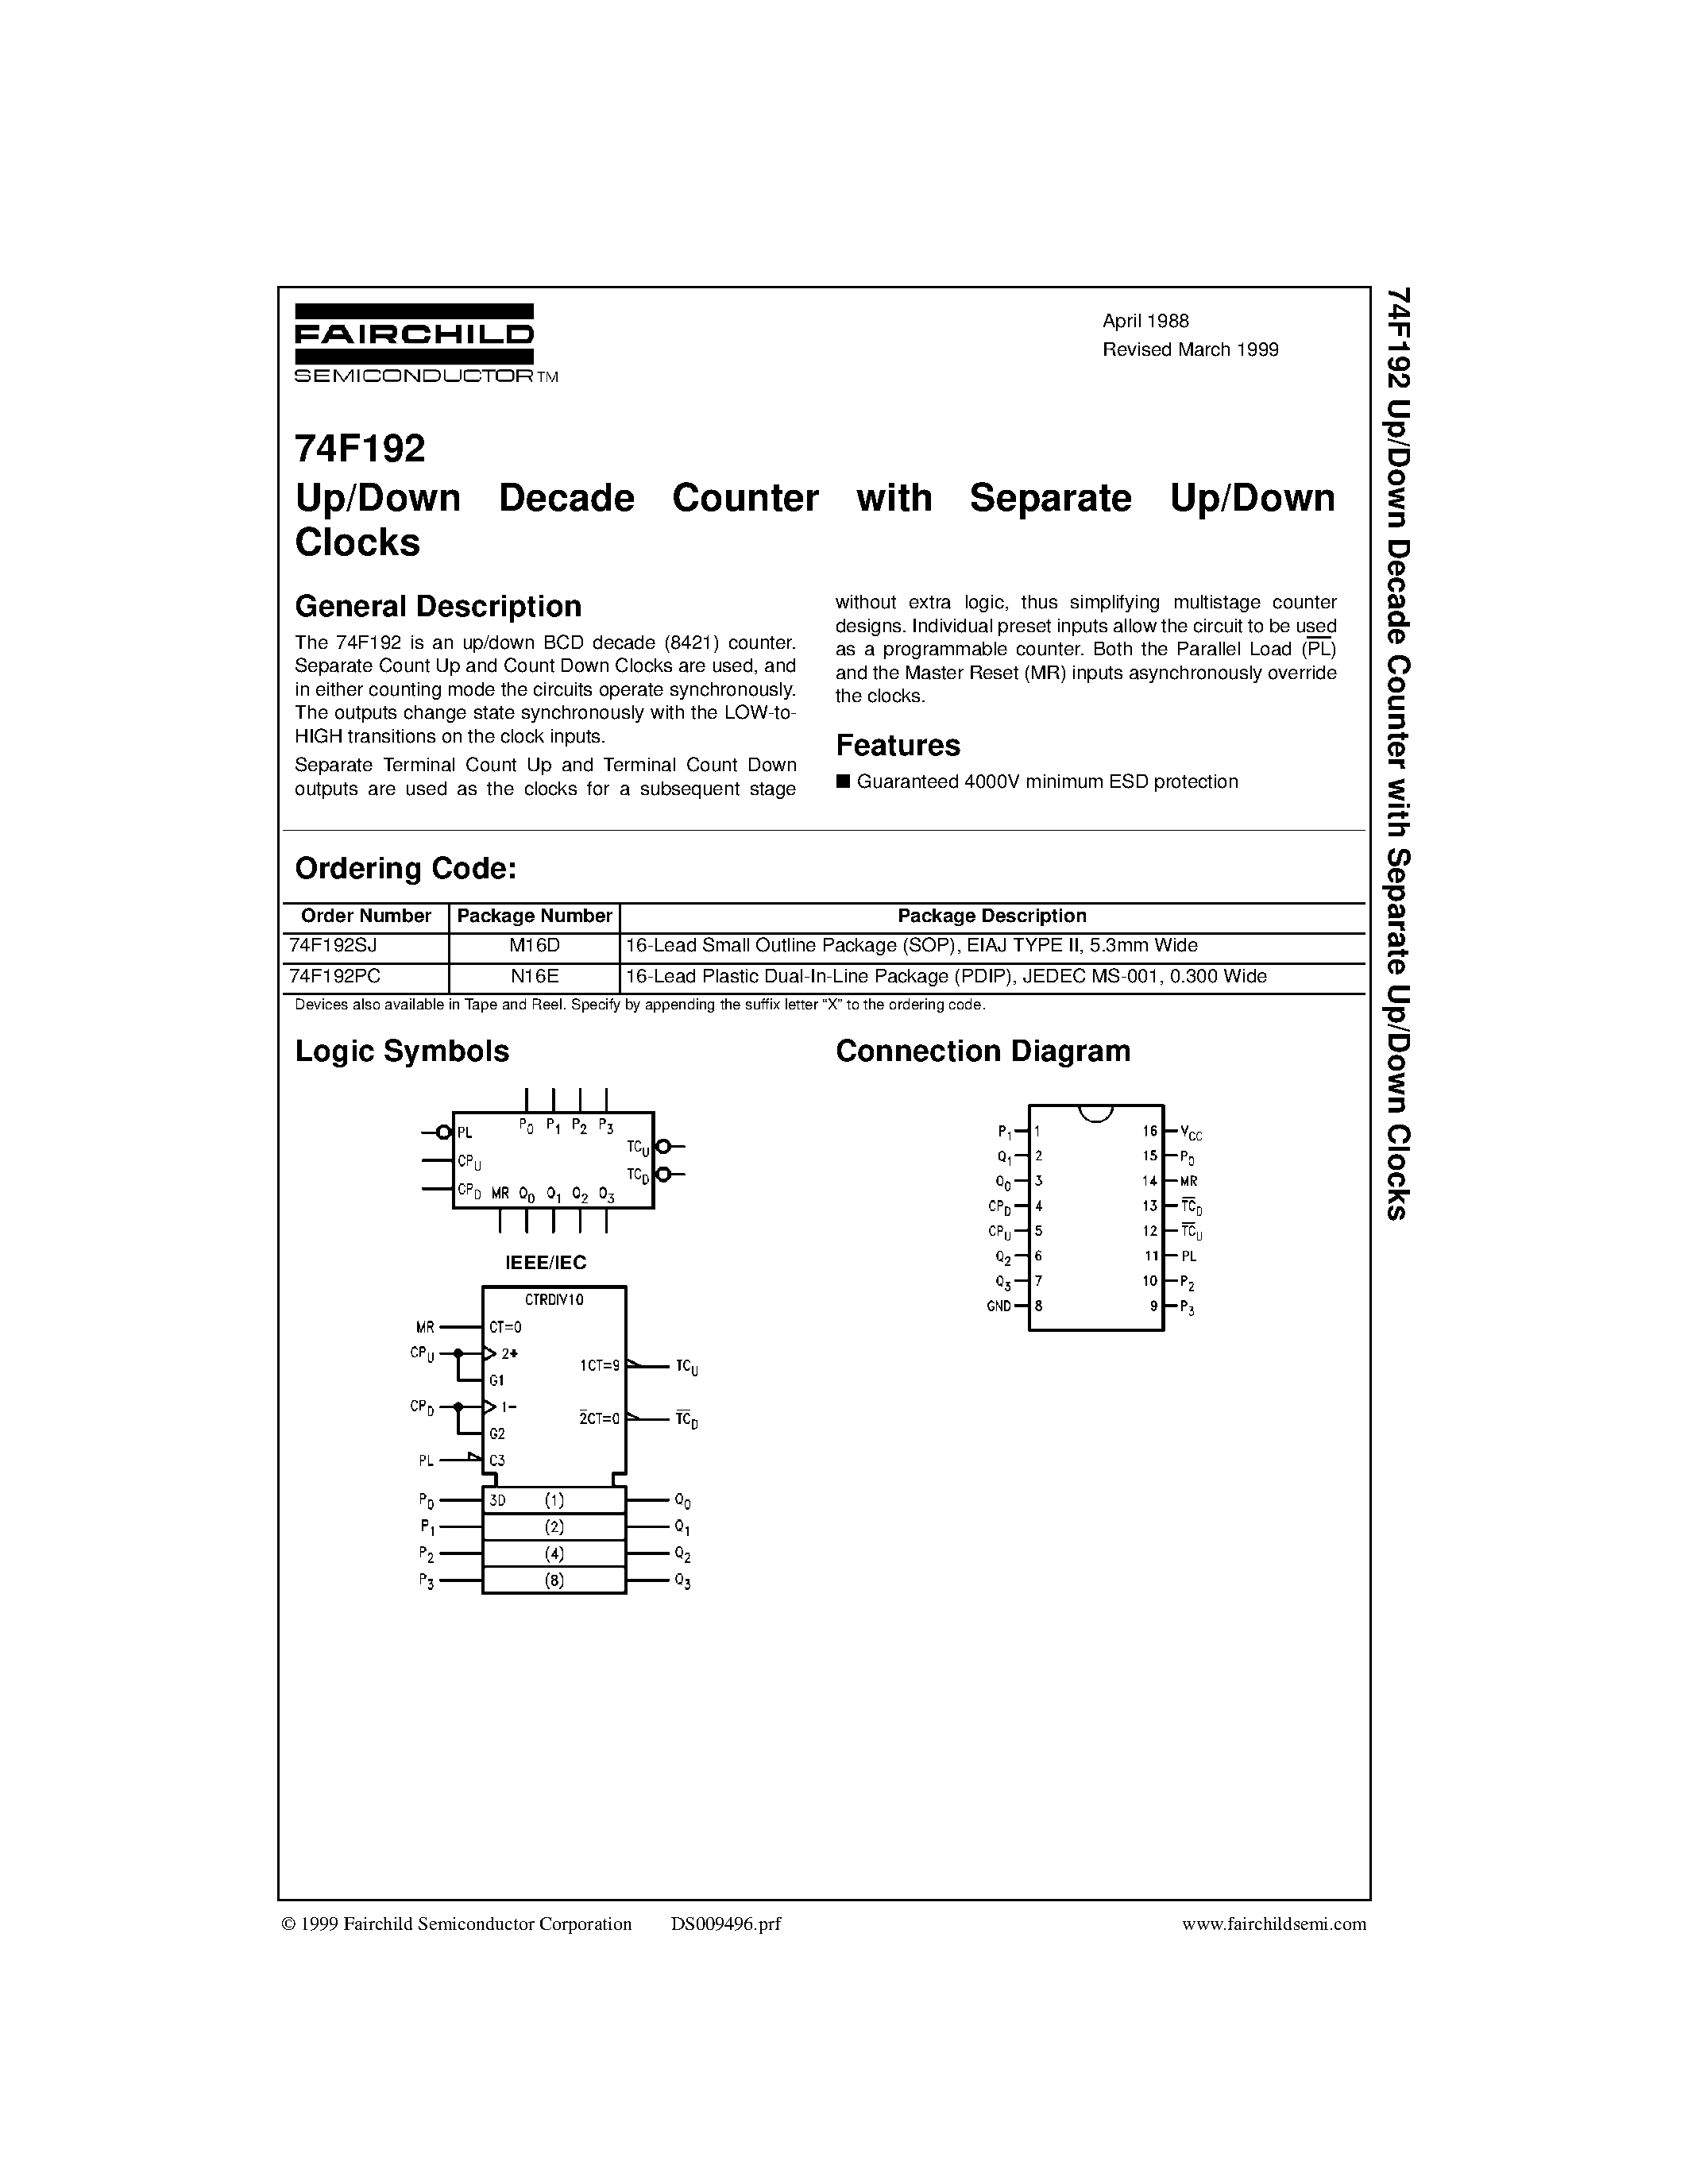 Datasheet 74F192 - Up/Down Decade Counter with Separate Up/Down Clocks page 1